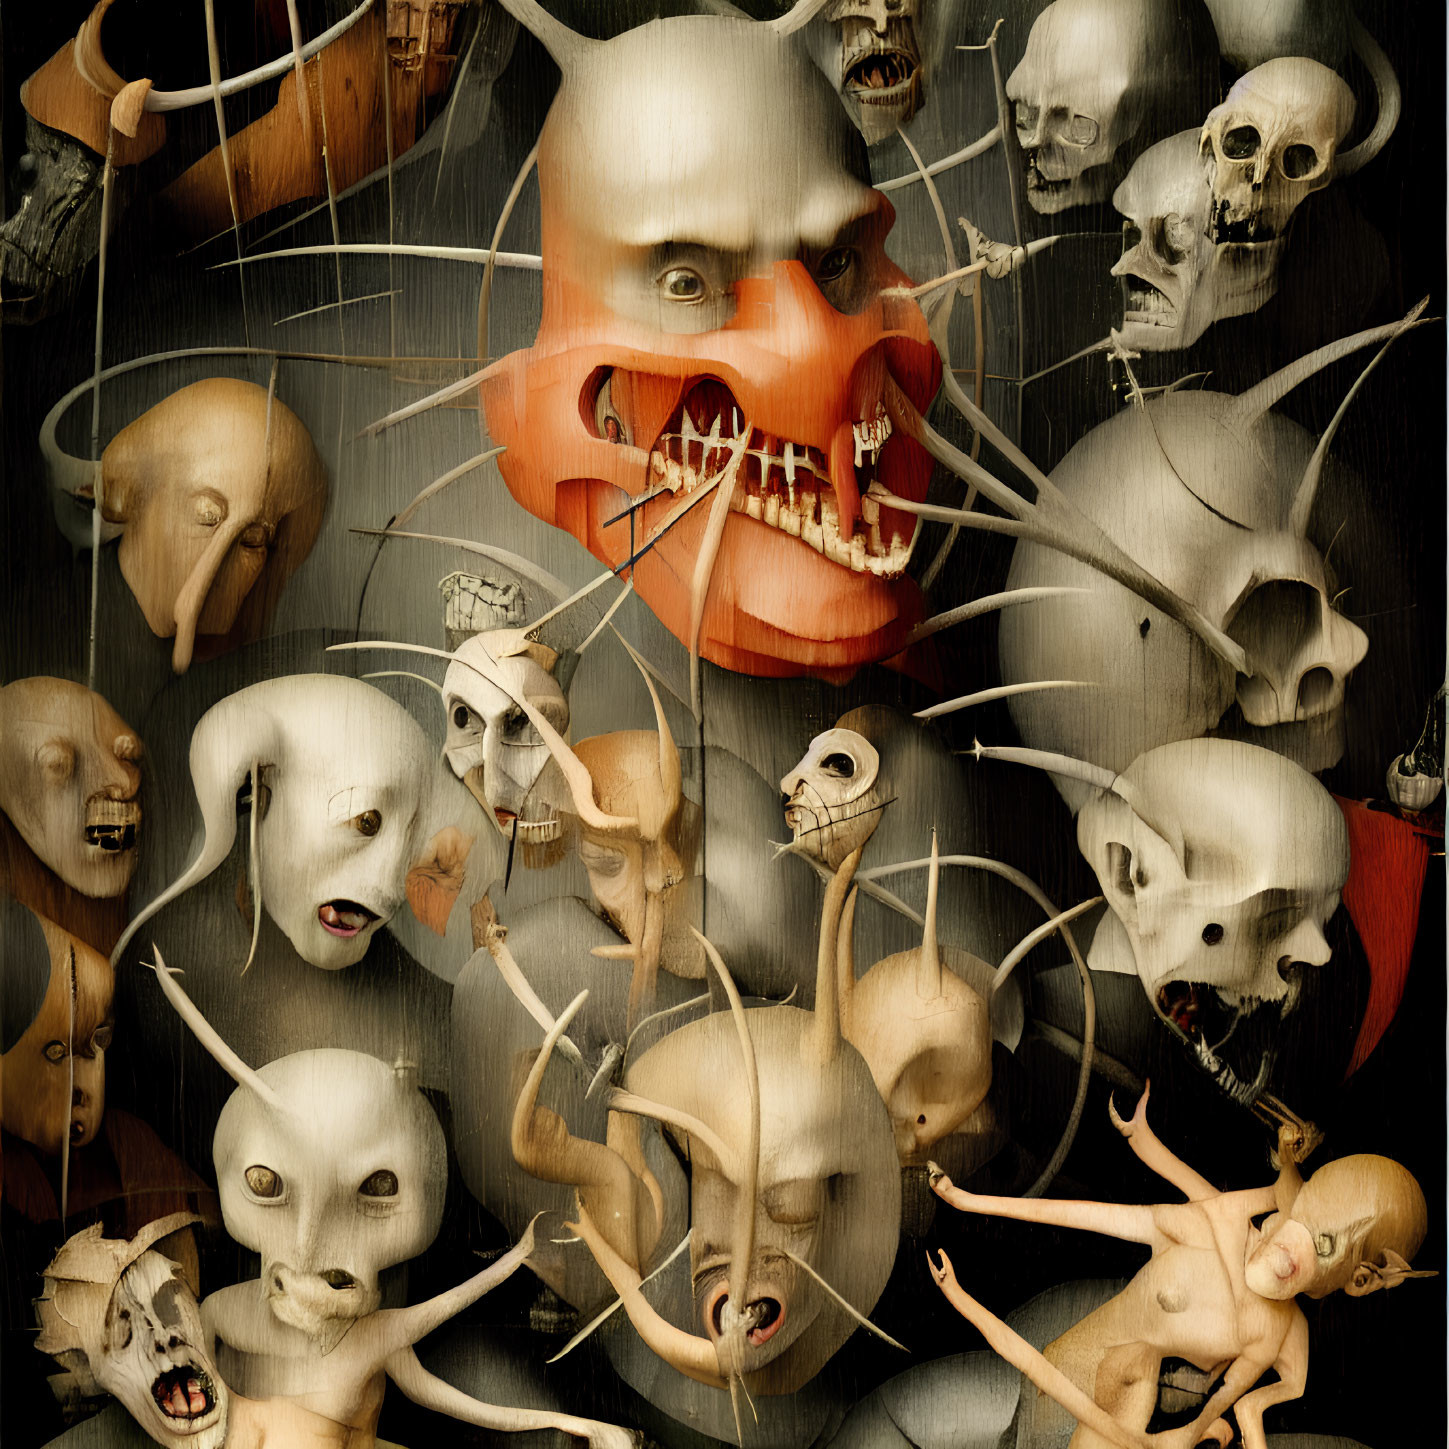 Assorted faces and skulls in surreal dark composition